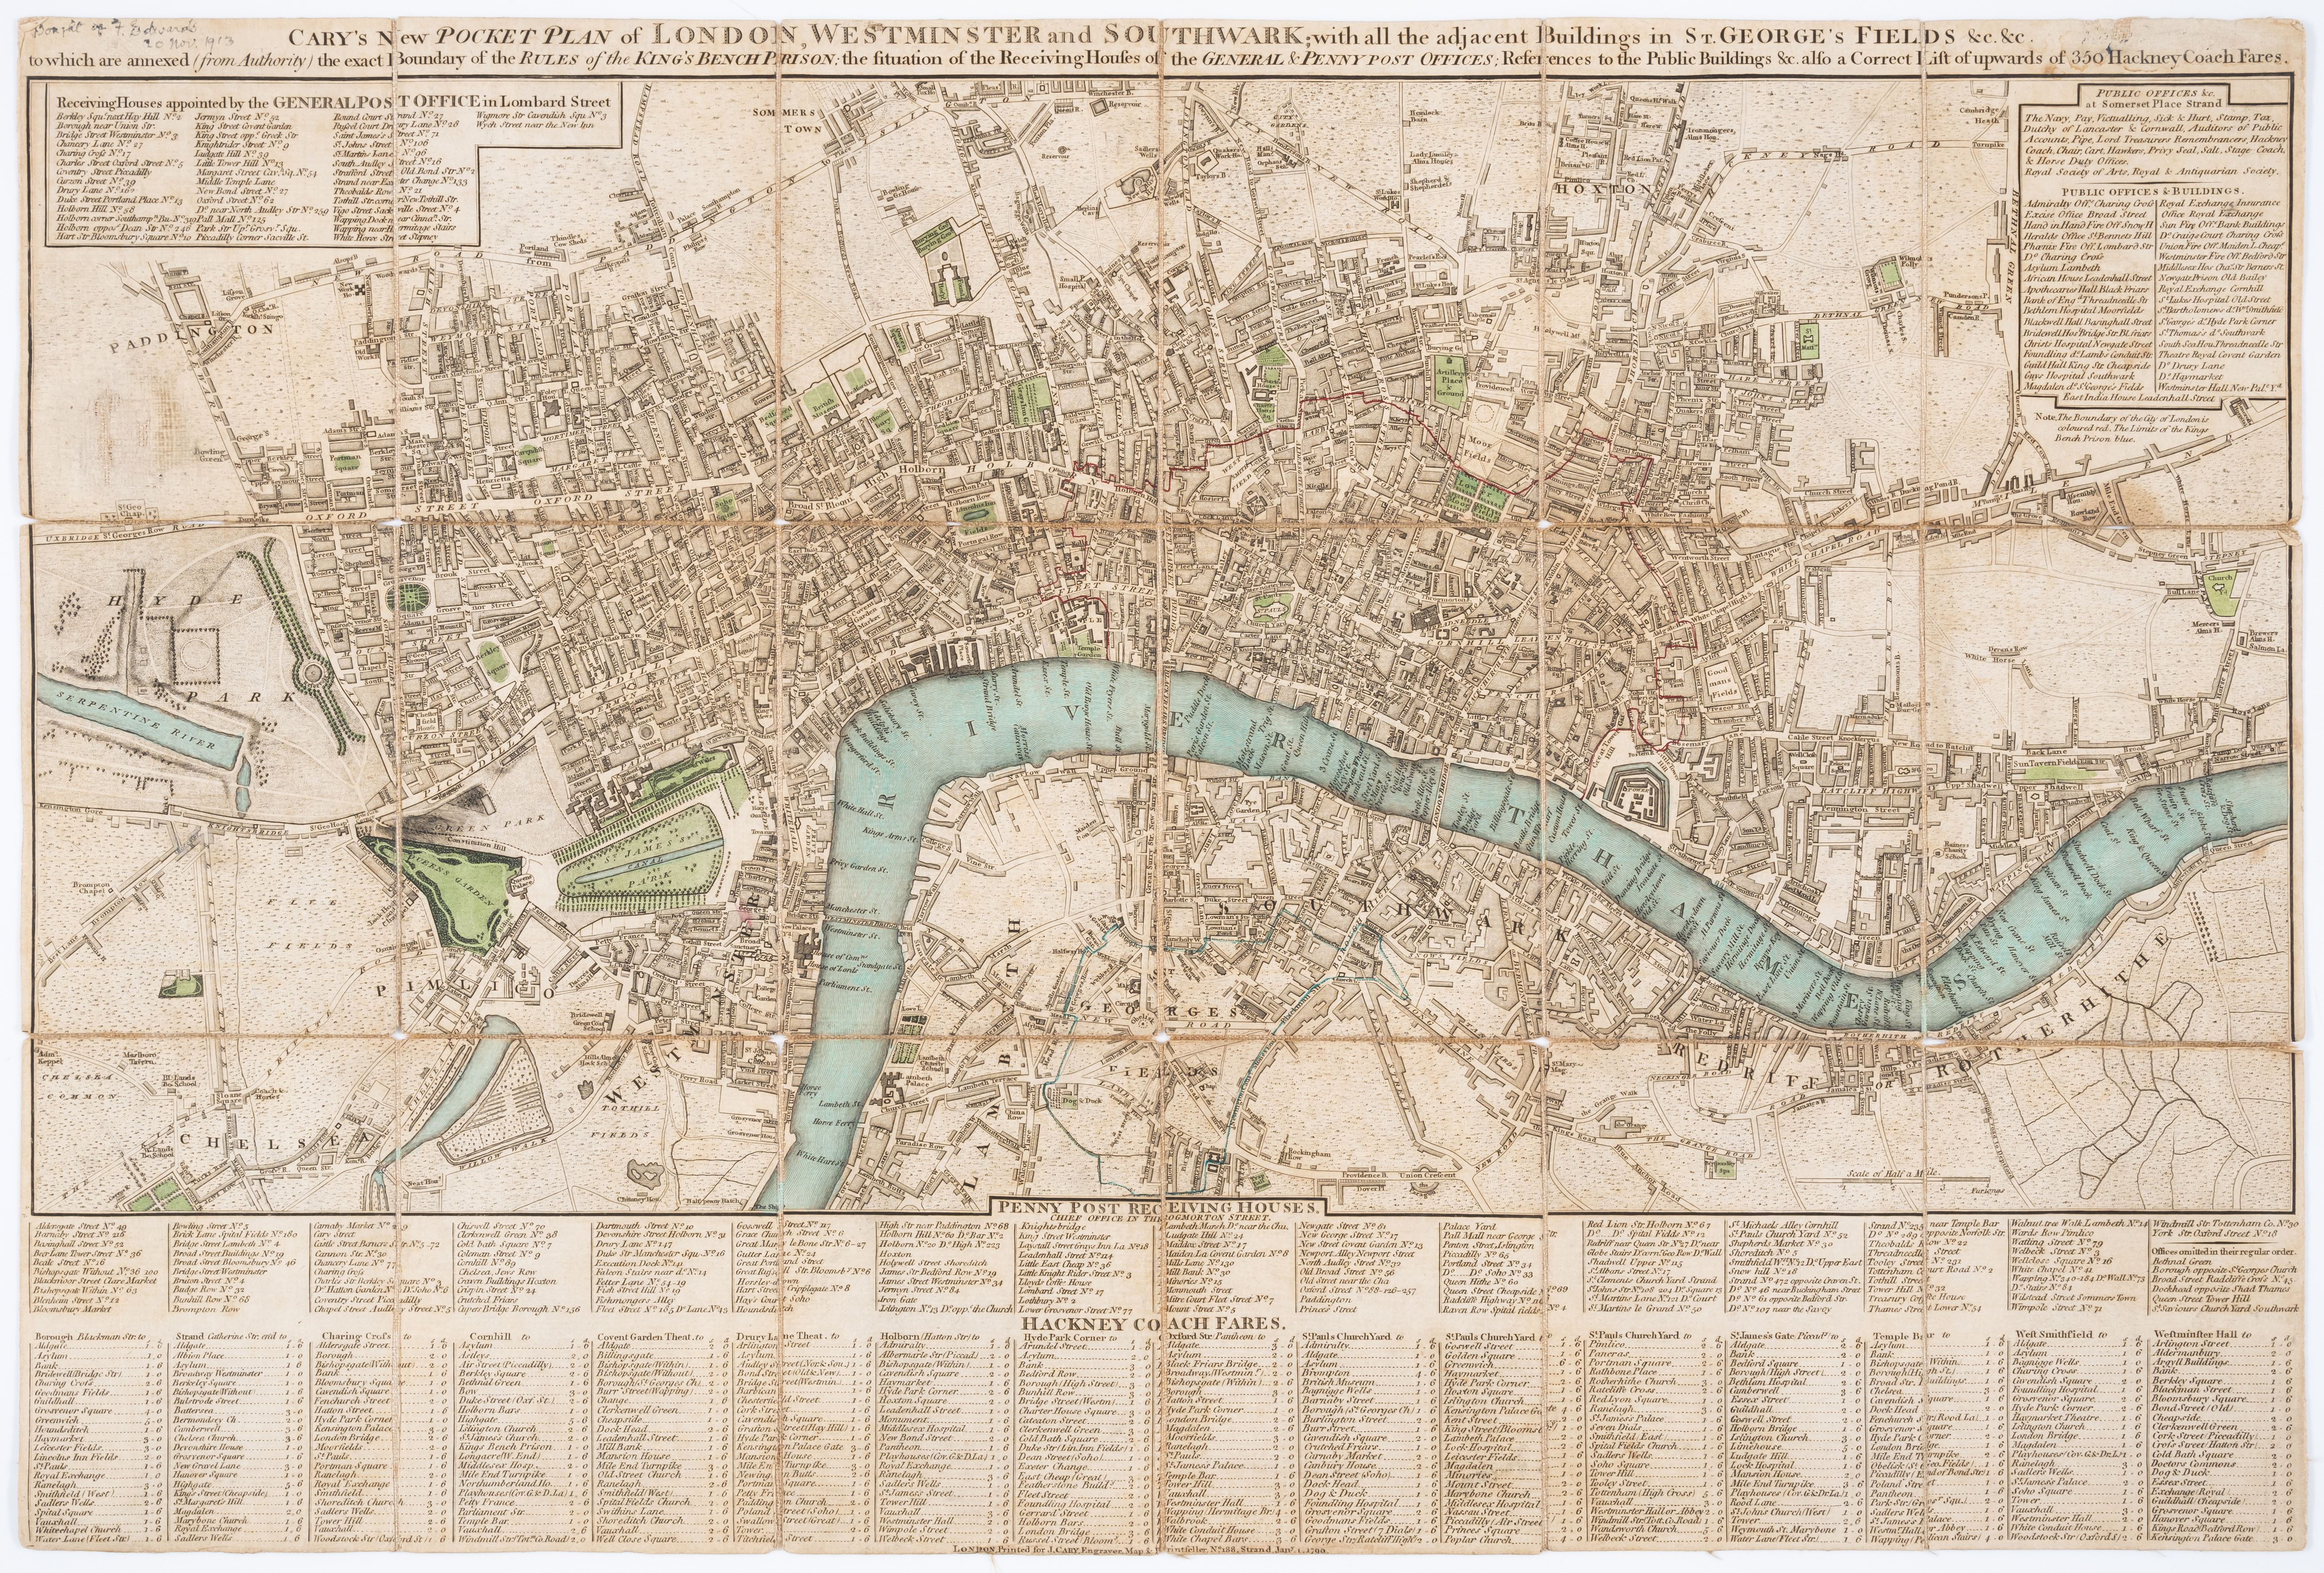 London.- Cary (John) Cary's New Pocket Plan of London, Westminster and Southwark, 1790